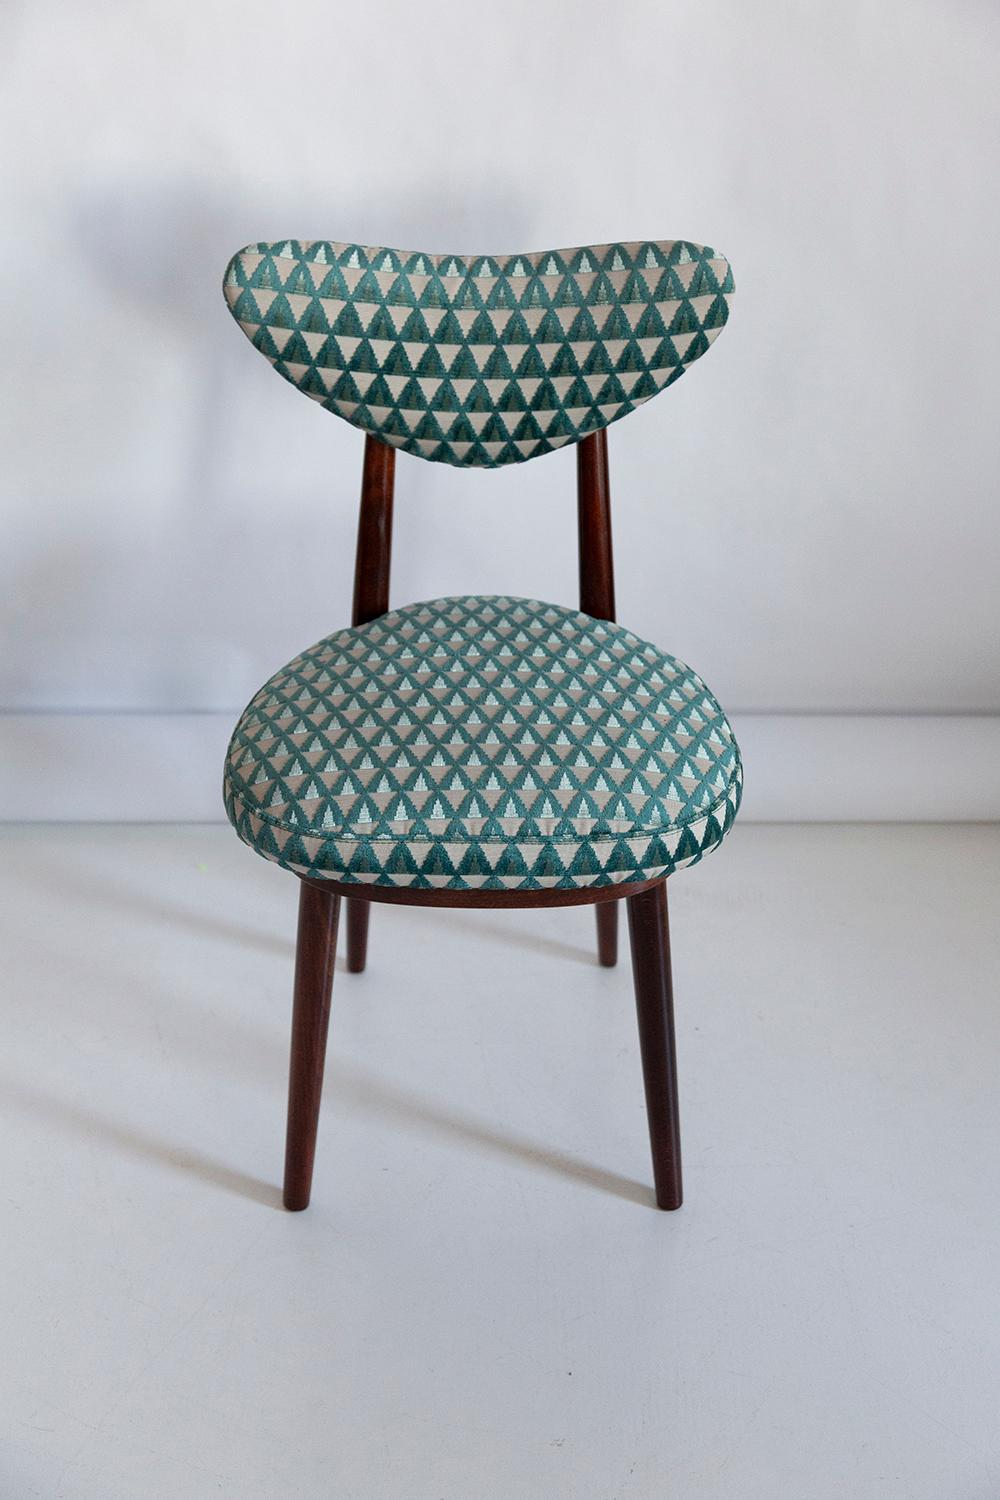 Set of Six Mid-Century Heart Chairs in Amuleto Green Velvet, Europe, 1960s For Sale 7